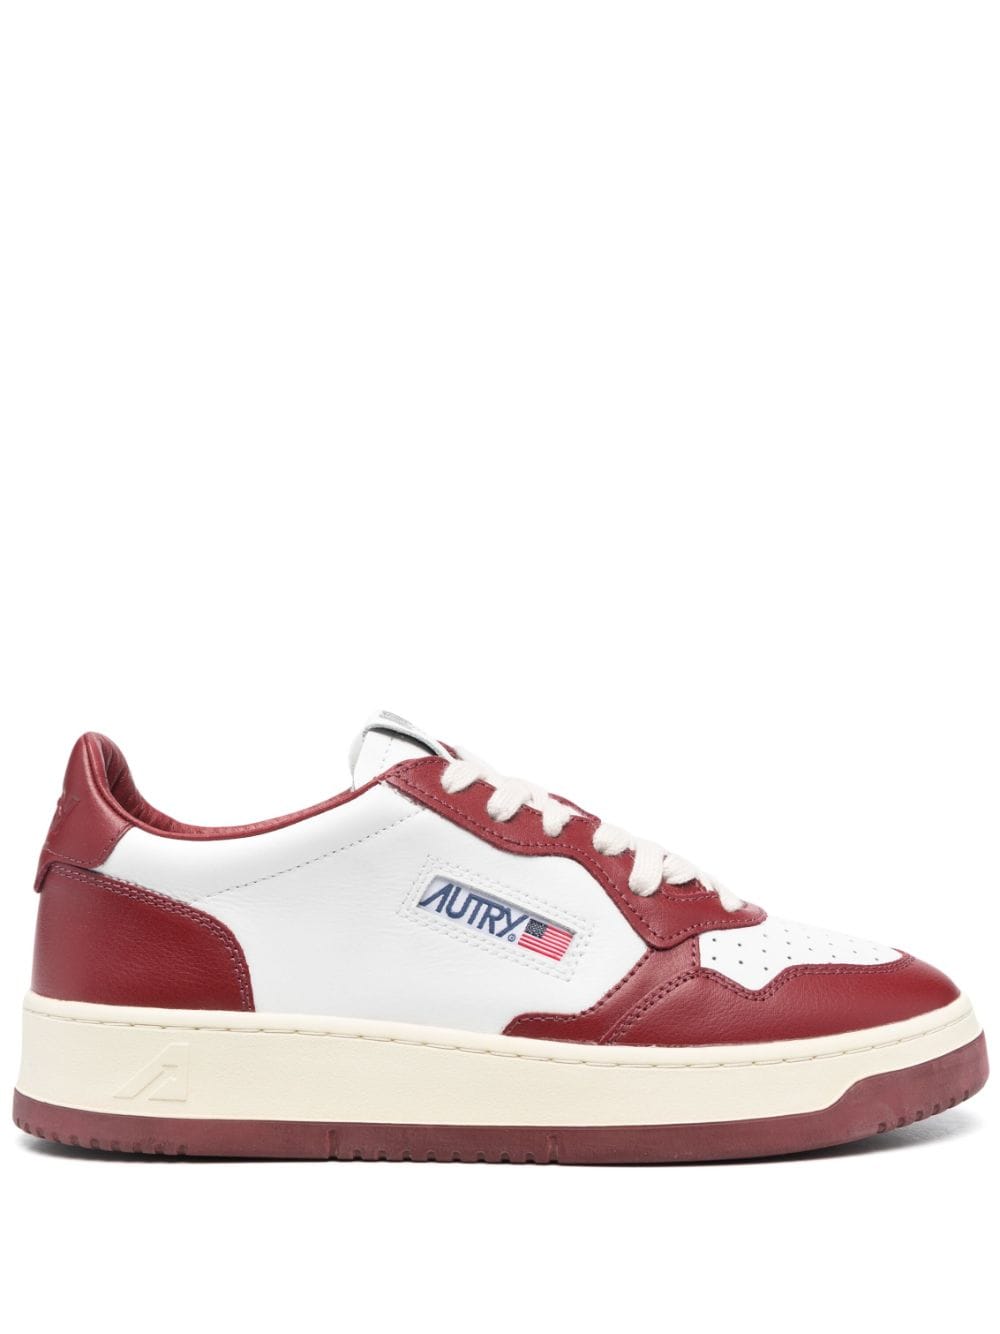 Autry Scarpe Stringate low-top sneakers - White